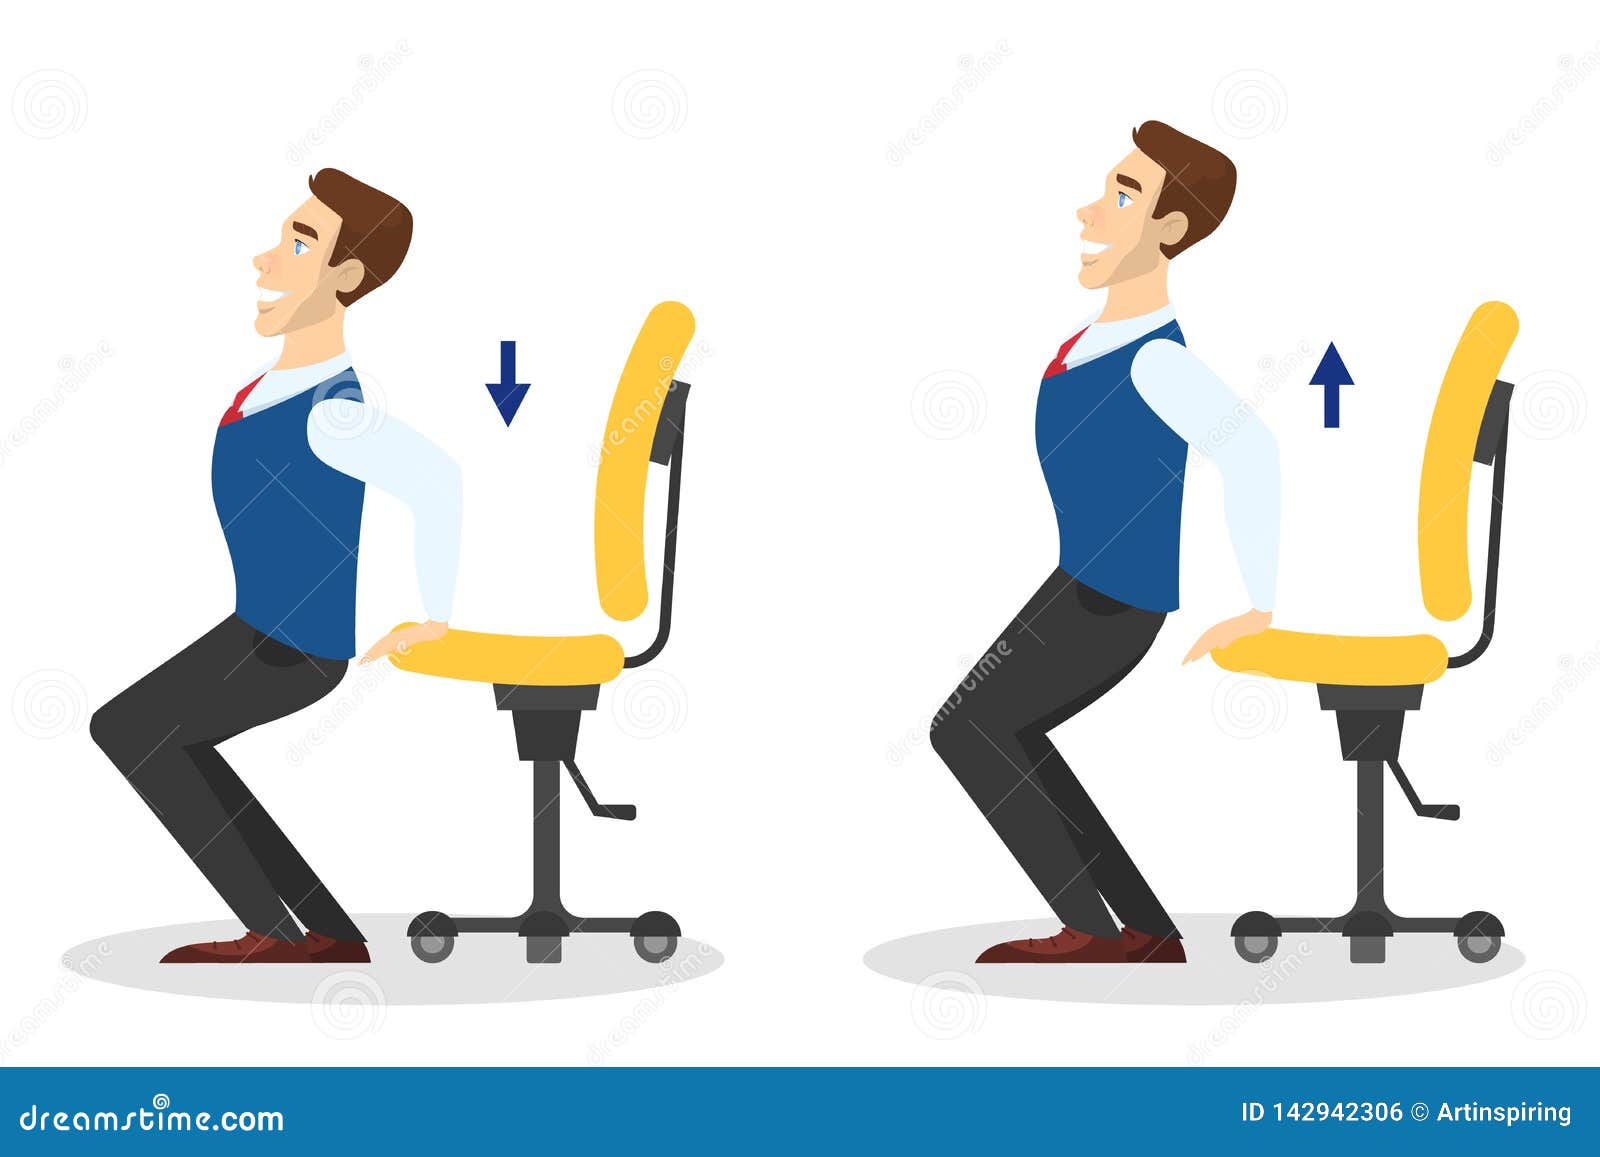 Man Doing Exercise With Chair In Office Stock Vector